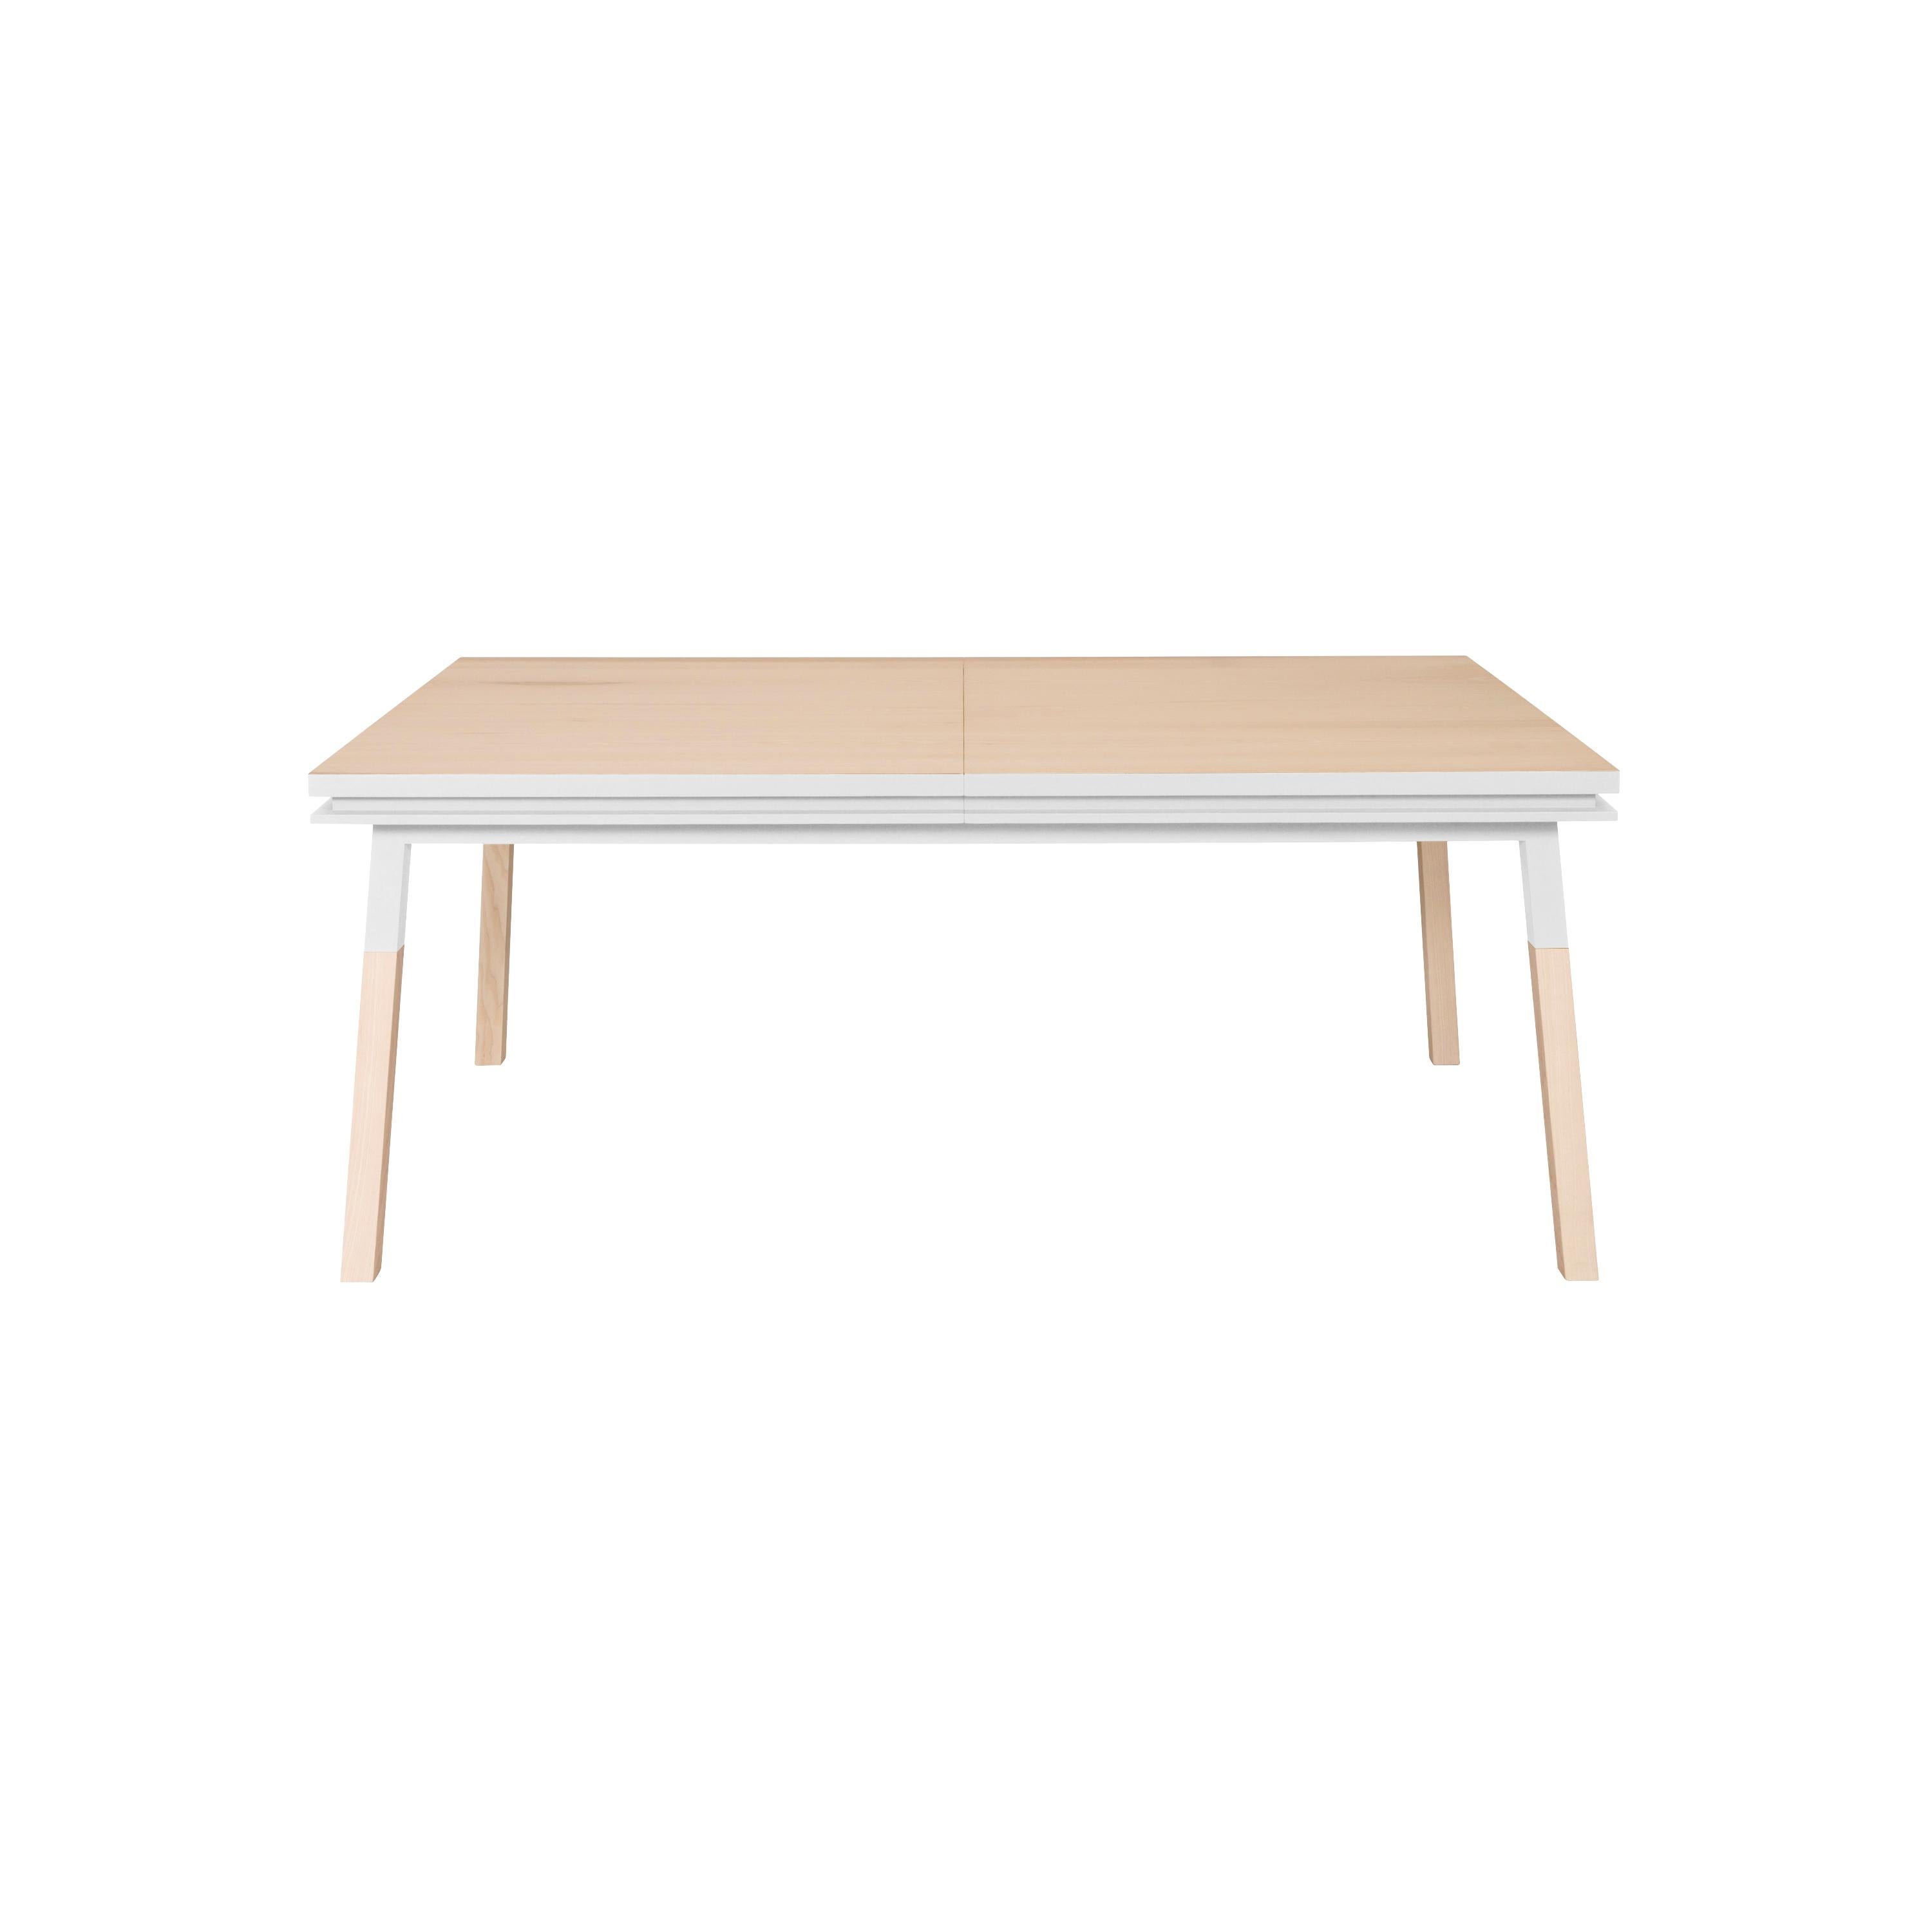 Hand-Crafted Extensible Table in Natural Solid Wood & White Finish, Design Eric Gizard, Paris For Sale